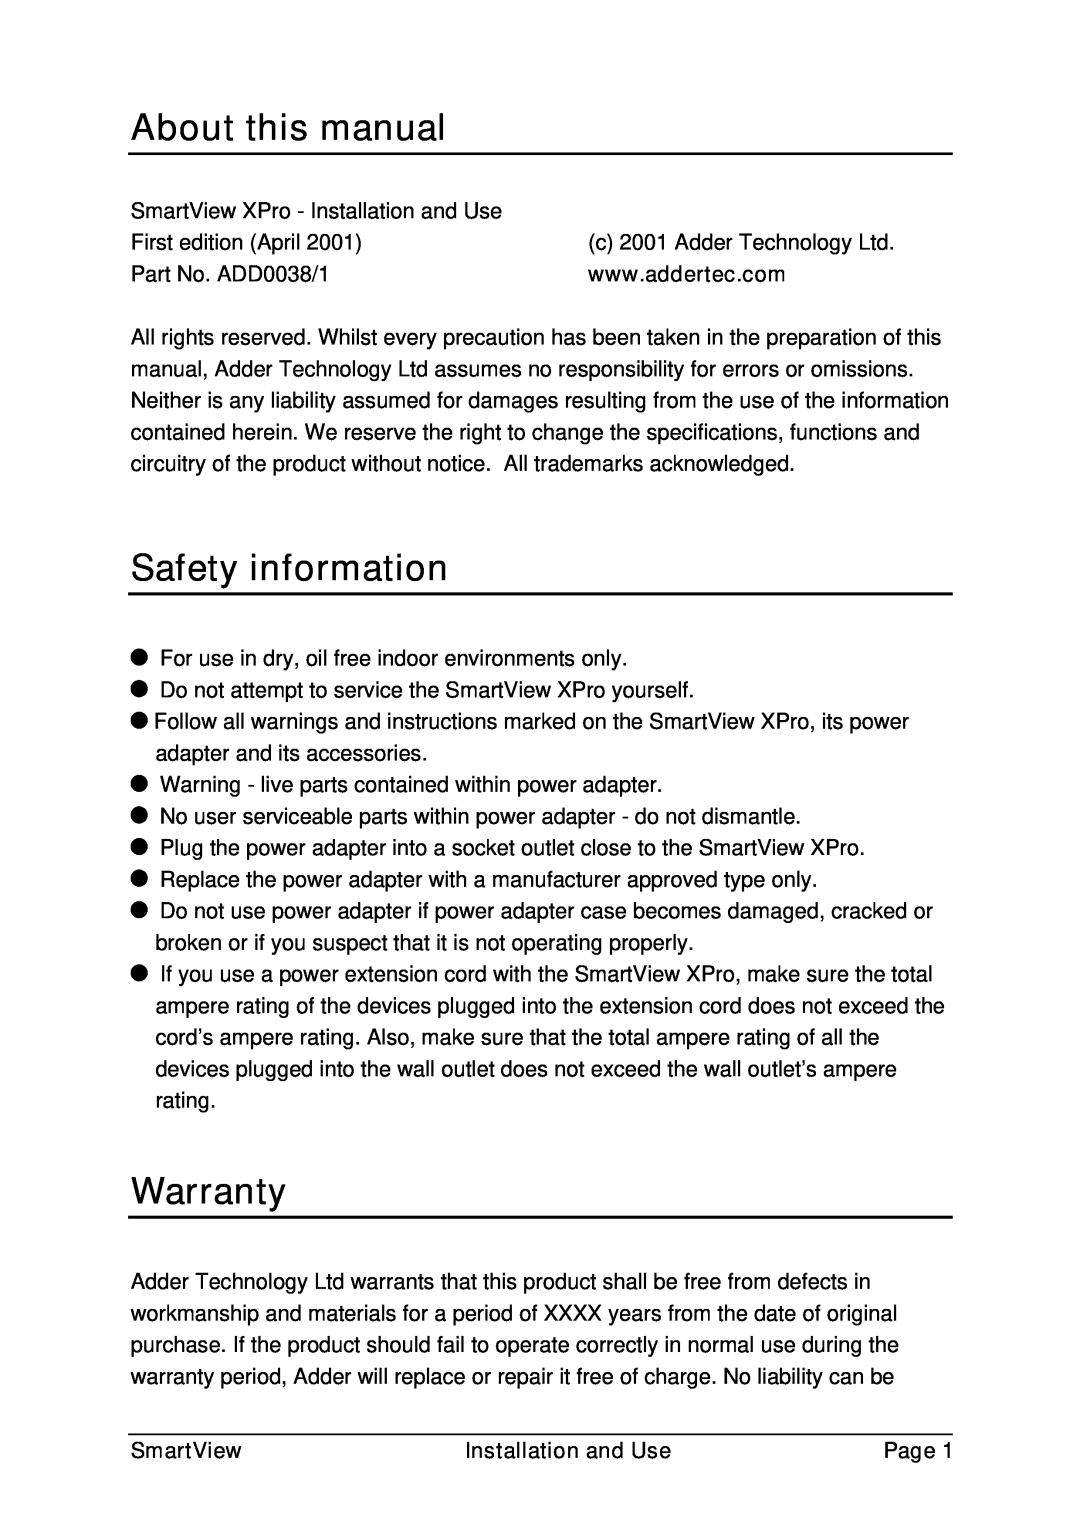 Adder Technology ADD0038/1 warranty About this manual, Safety information, Warranty, SmartView, Installation and Use, Page 